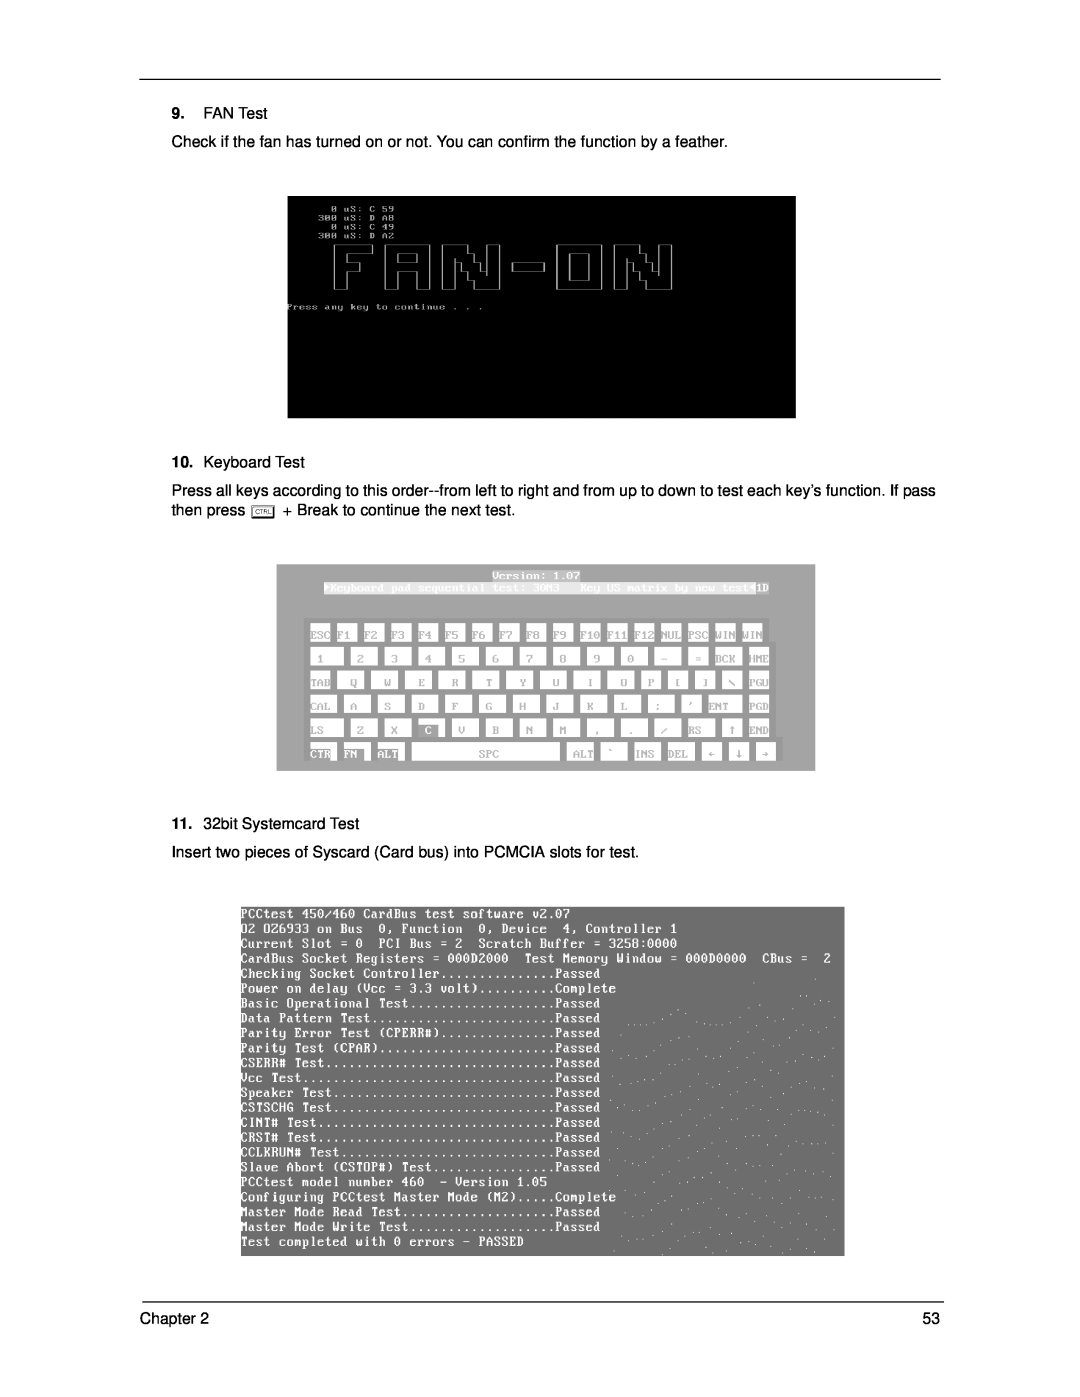 Acer 270 manual FAN Test, Keyboard Test, then press + Break to continue the next test, 11. 32bit SystemcardbTest, Chapter 